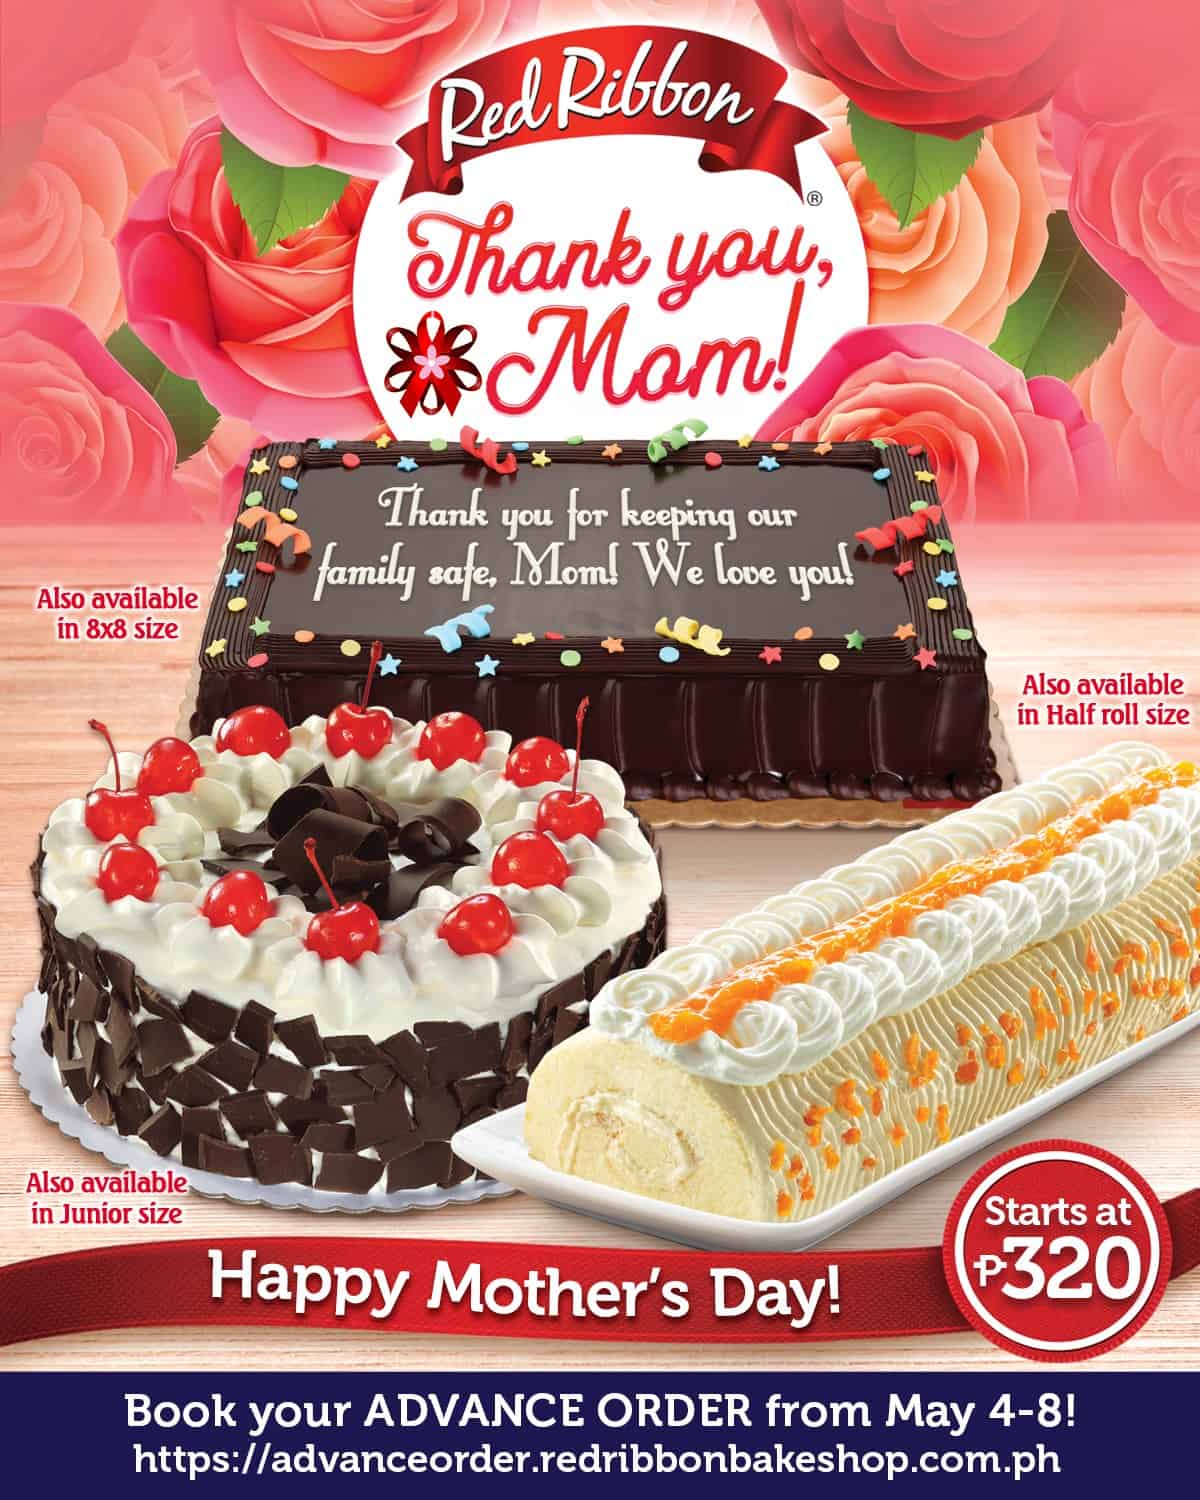 How to Pre-Order MOTHERS' DAY CAKE: Red Ribbon, Goldilocks, Cake2Go